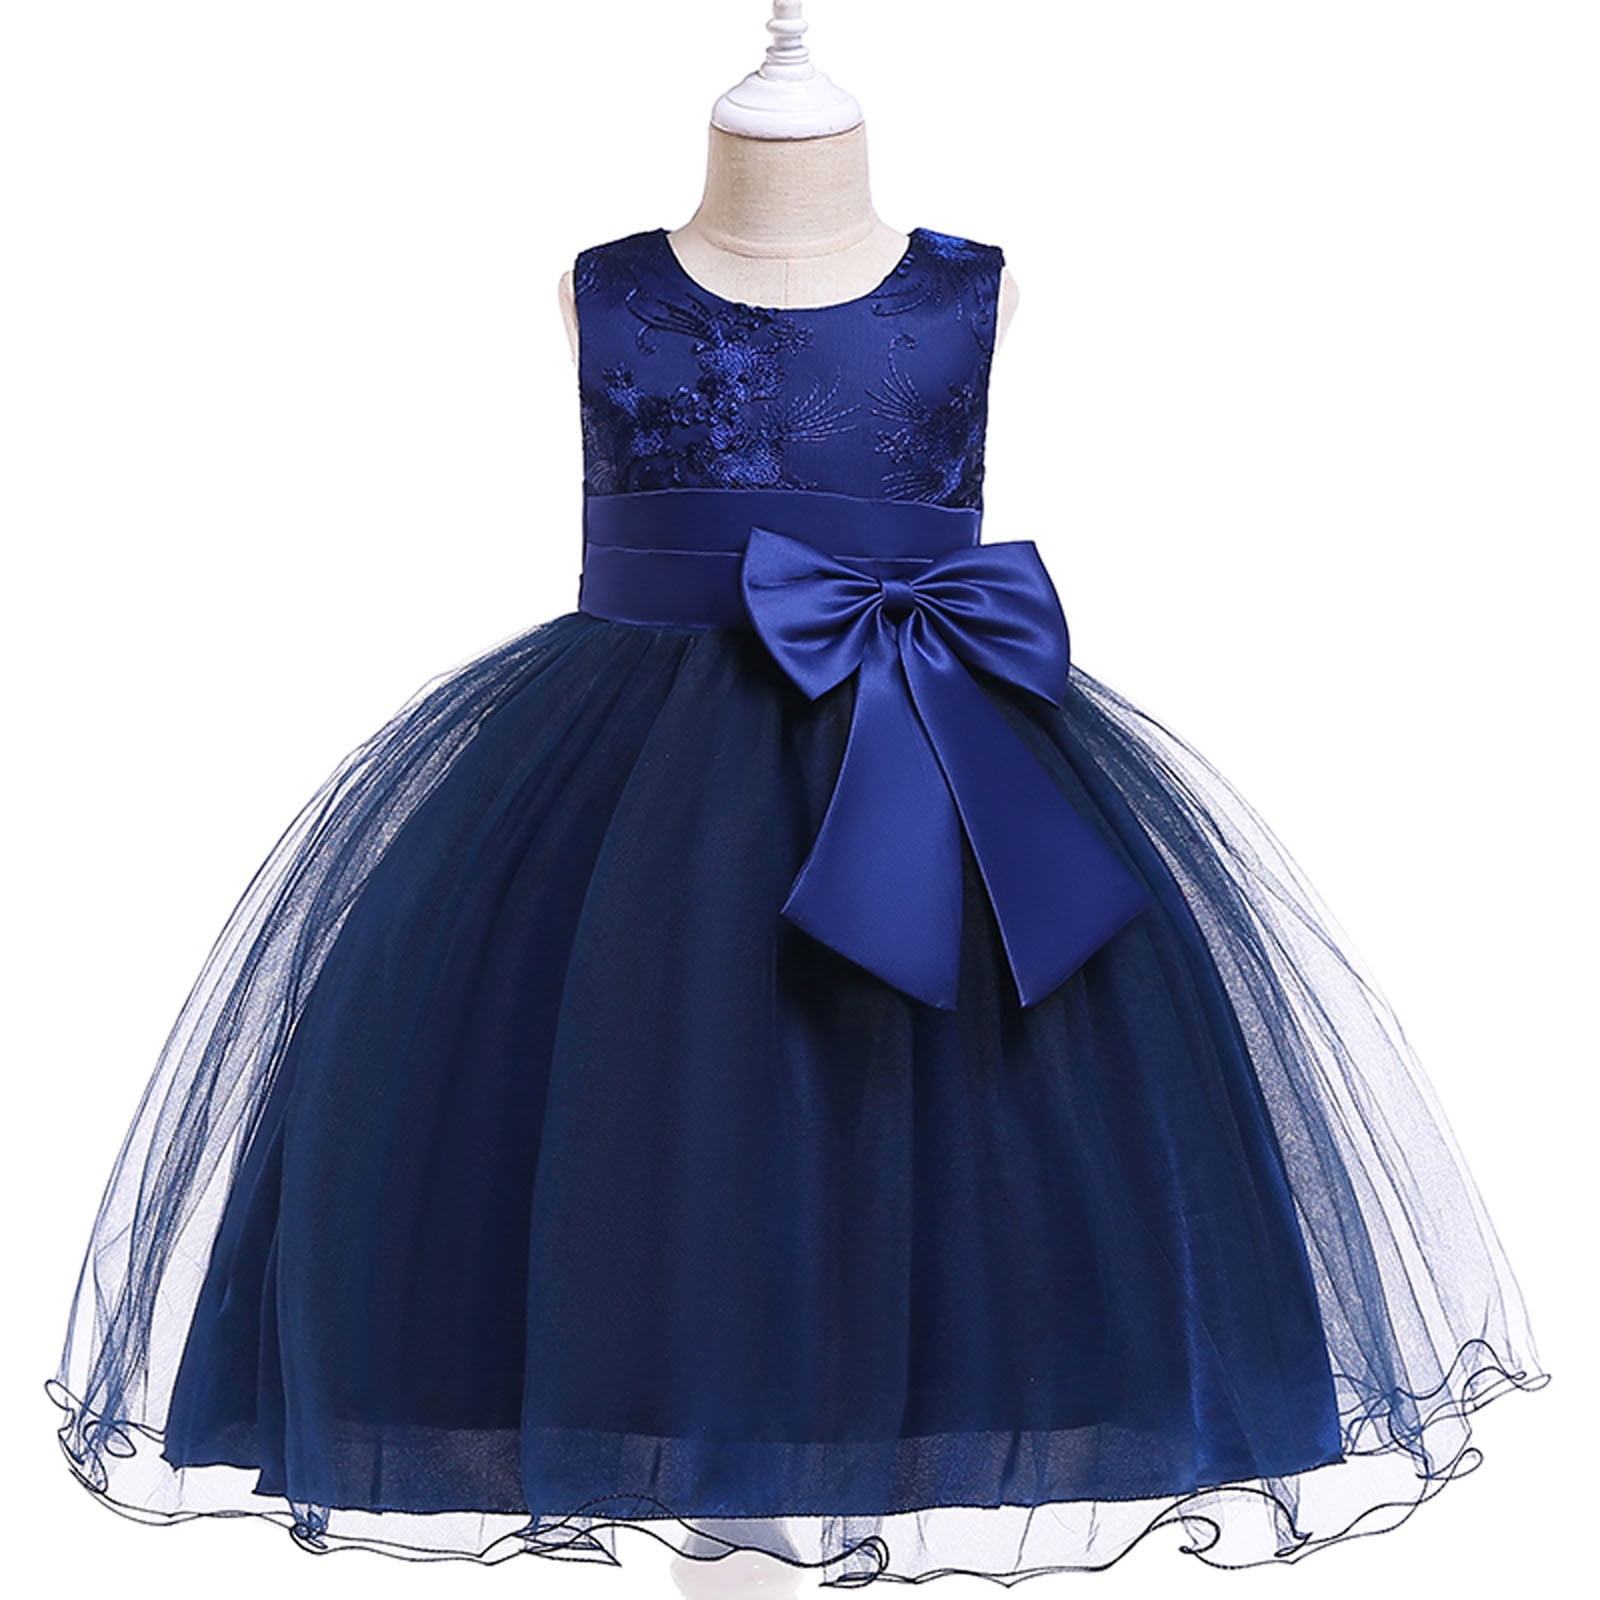 Dresses, Gowns, Sets & more for Girls | Little Muffet